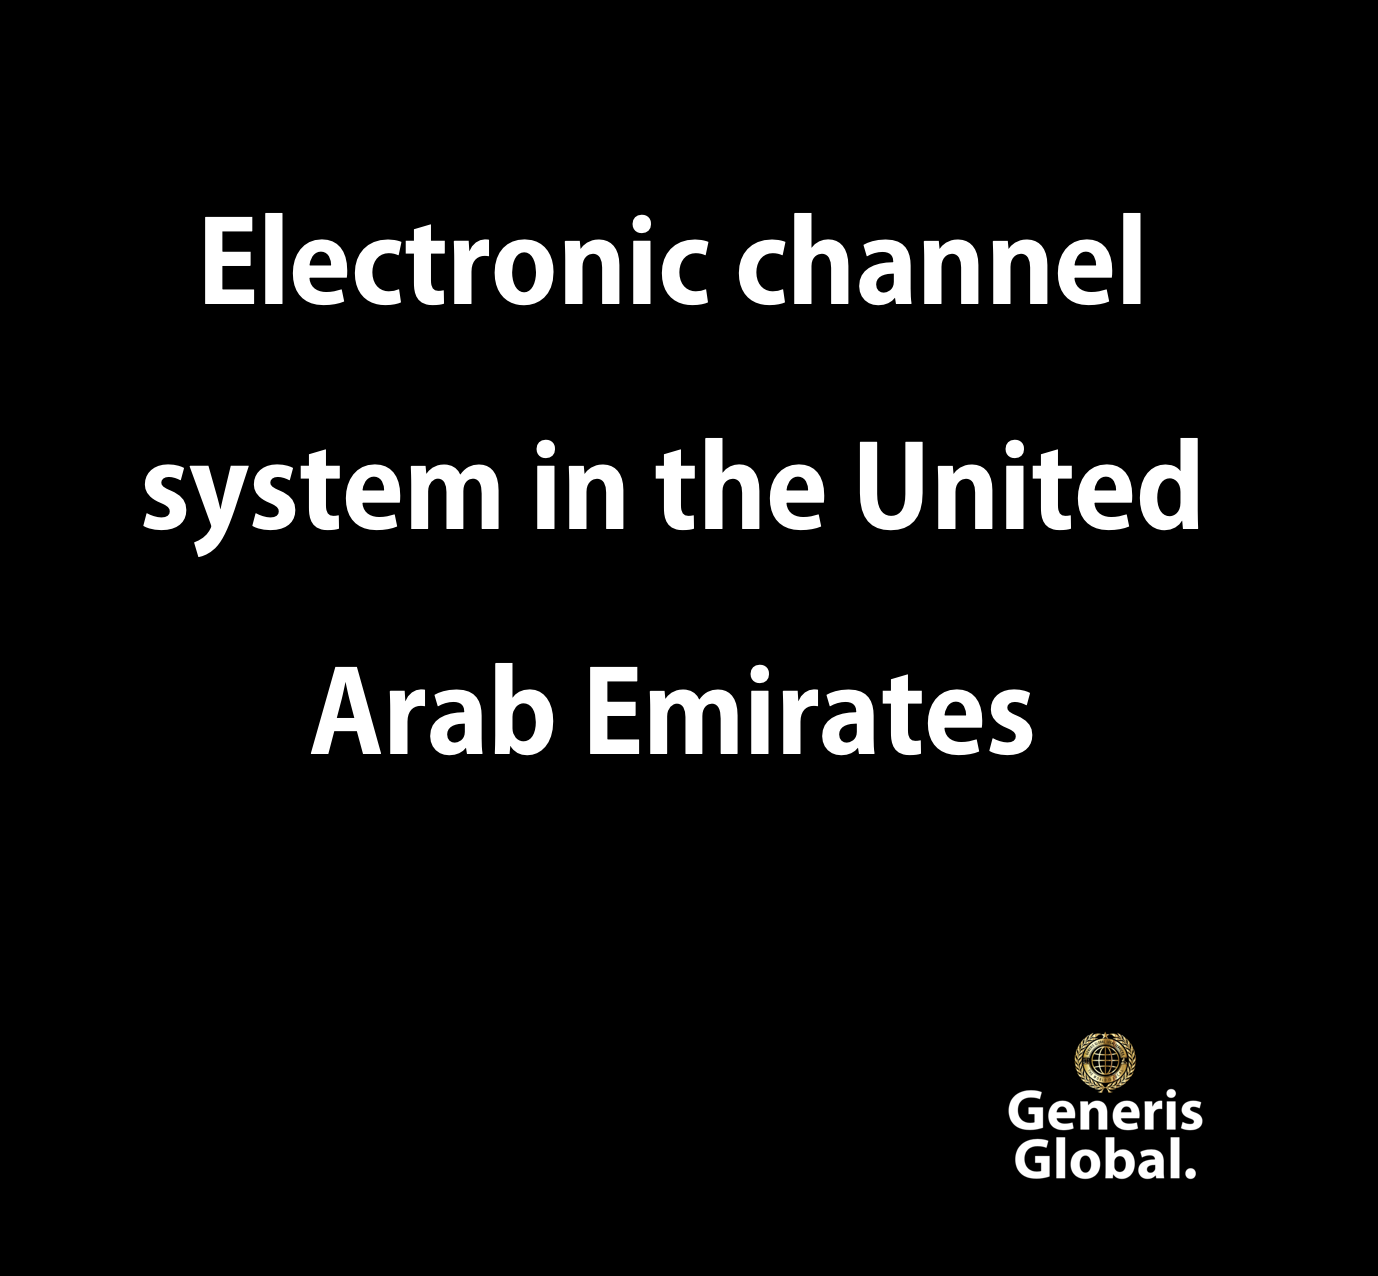 e-channel system in the United Arab Emirates